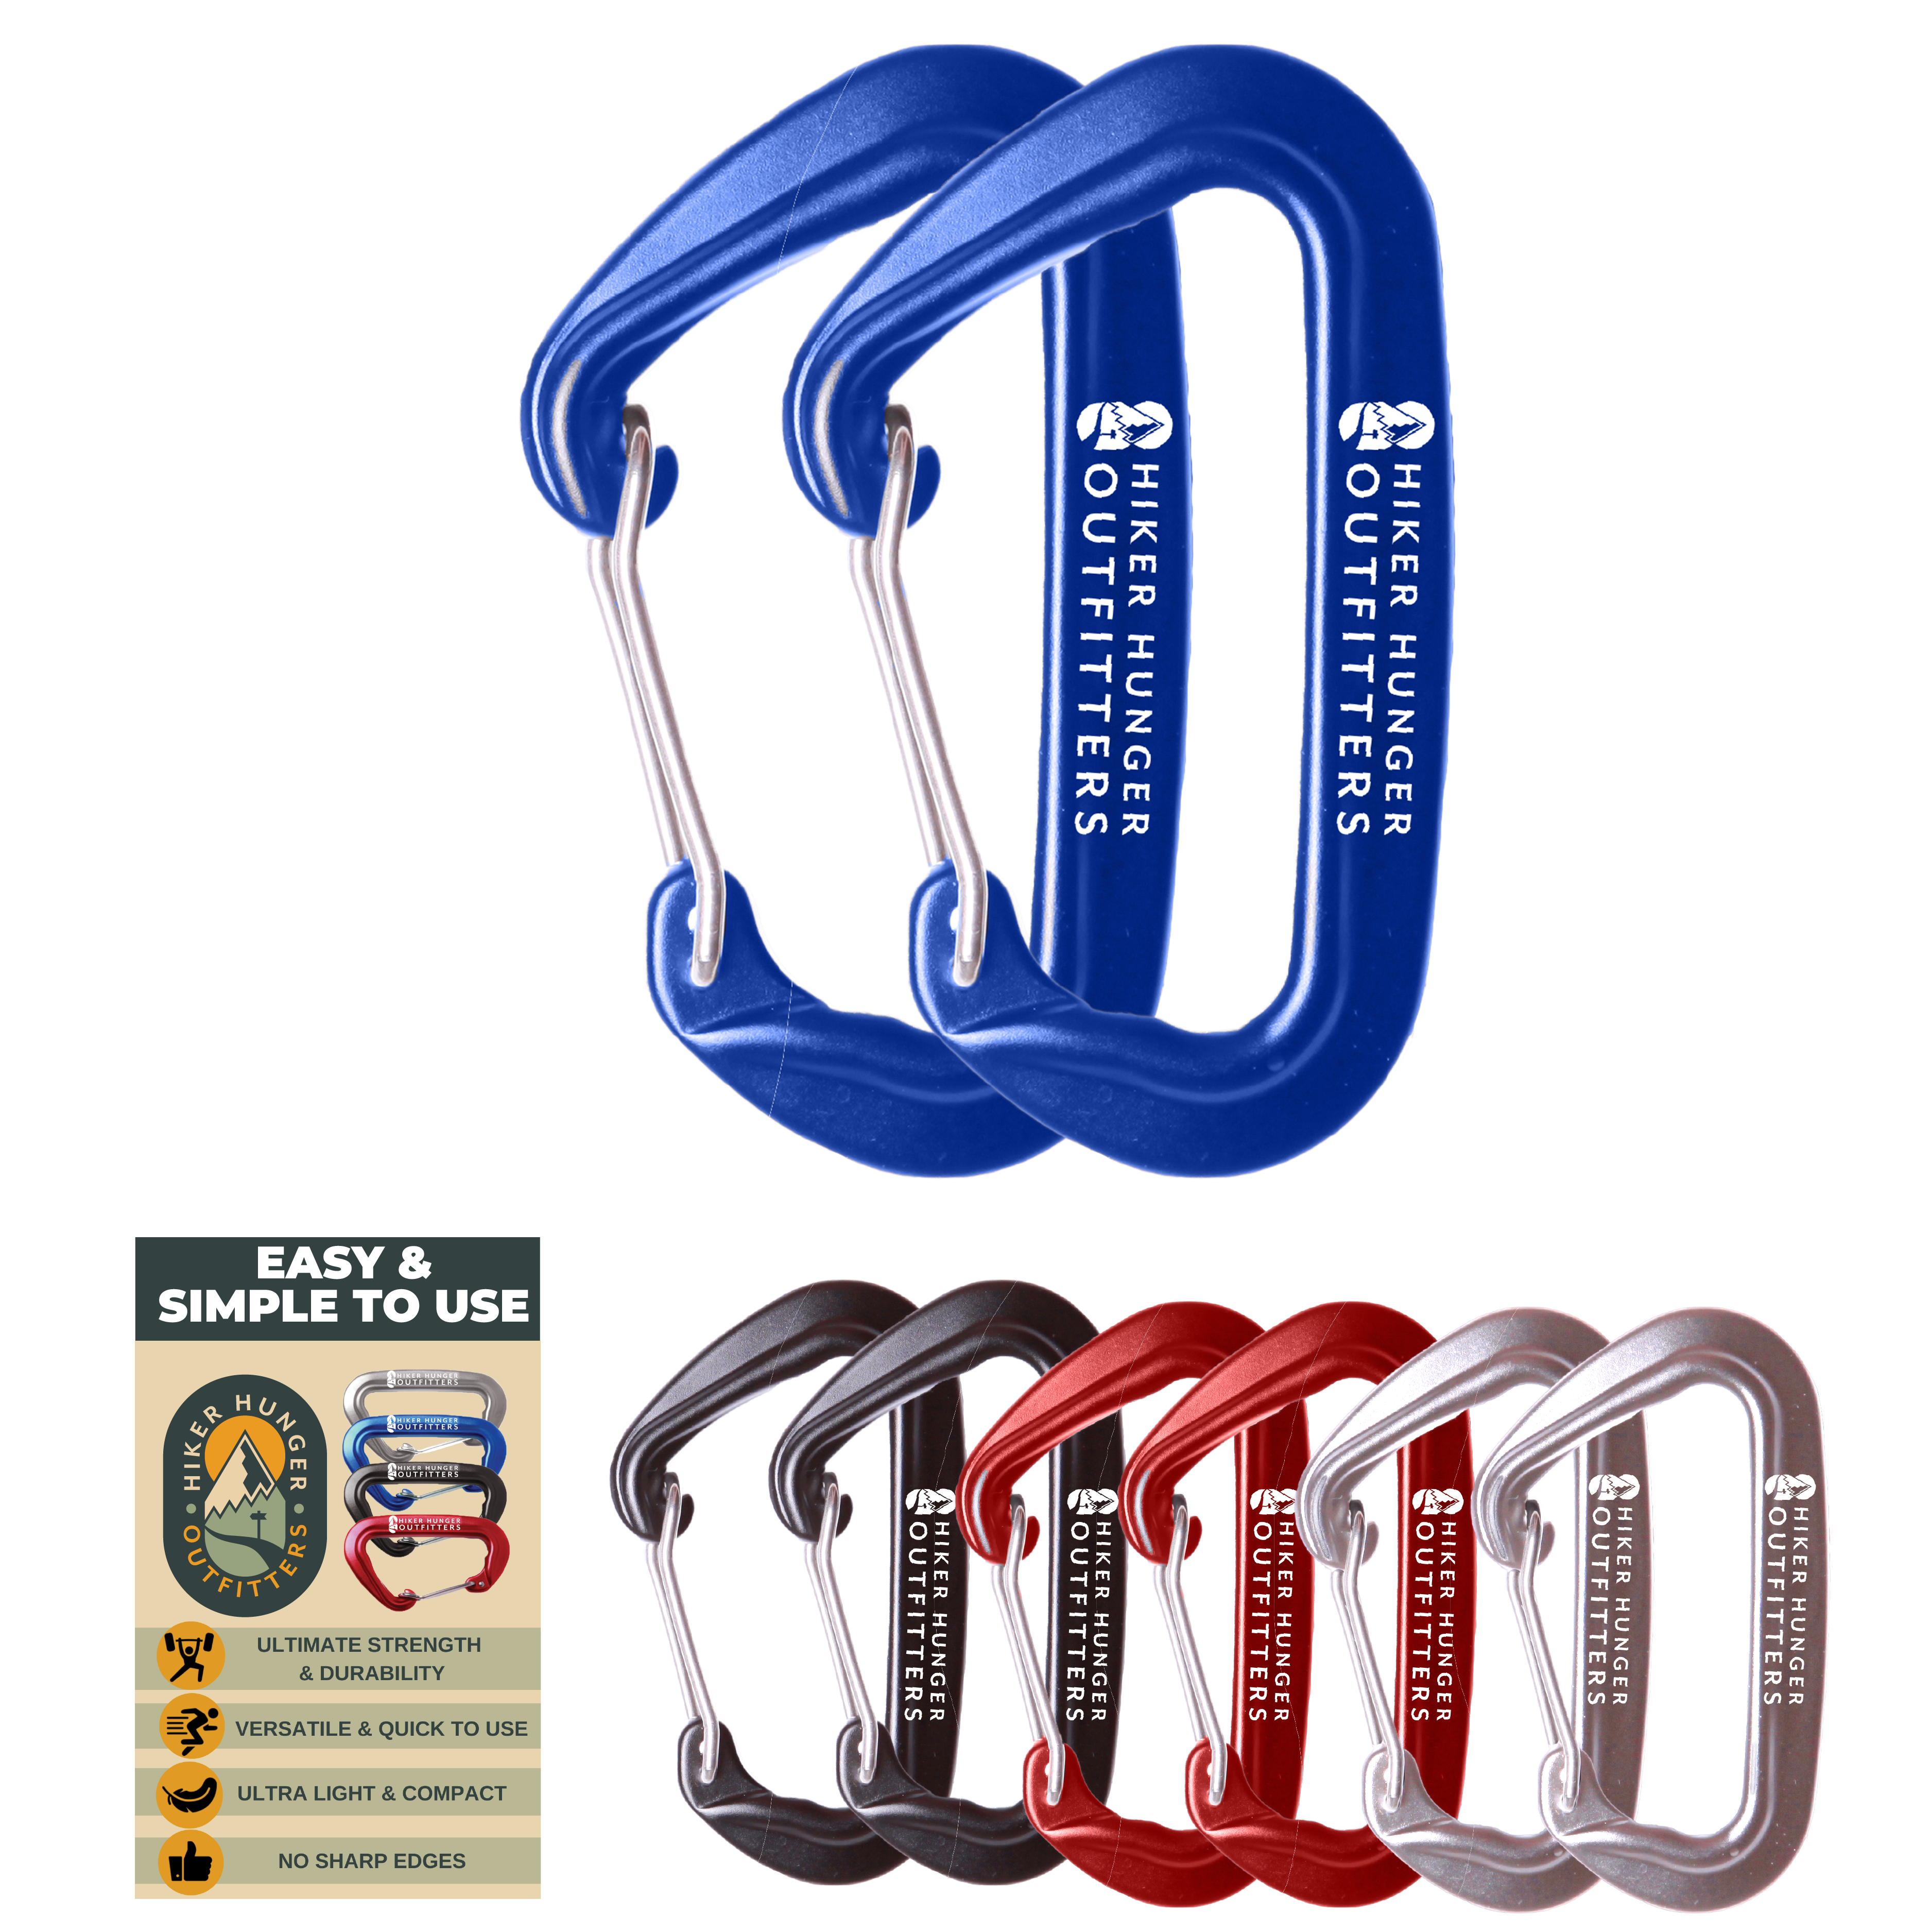 Aluminum Wire Gate Carabiners | Hiker Hunger Outfitters - Best Hiking Gear!